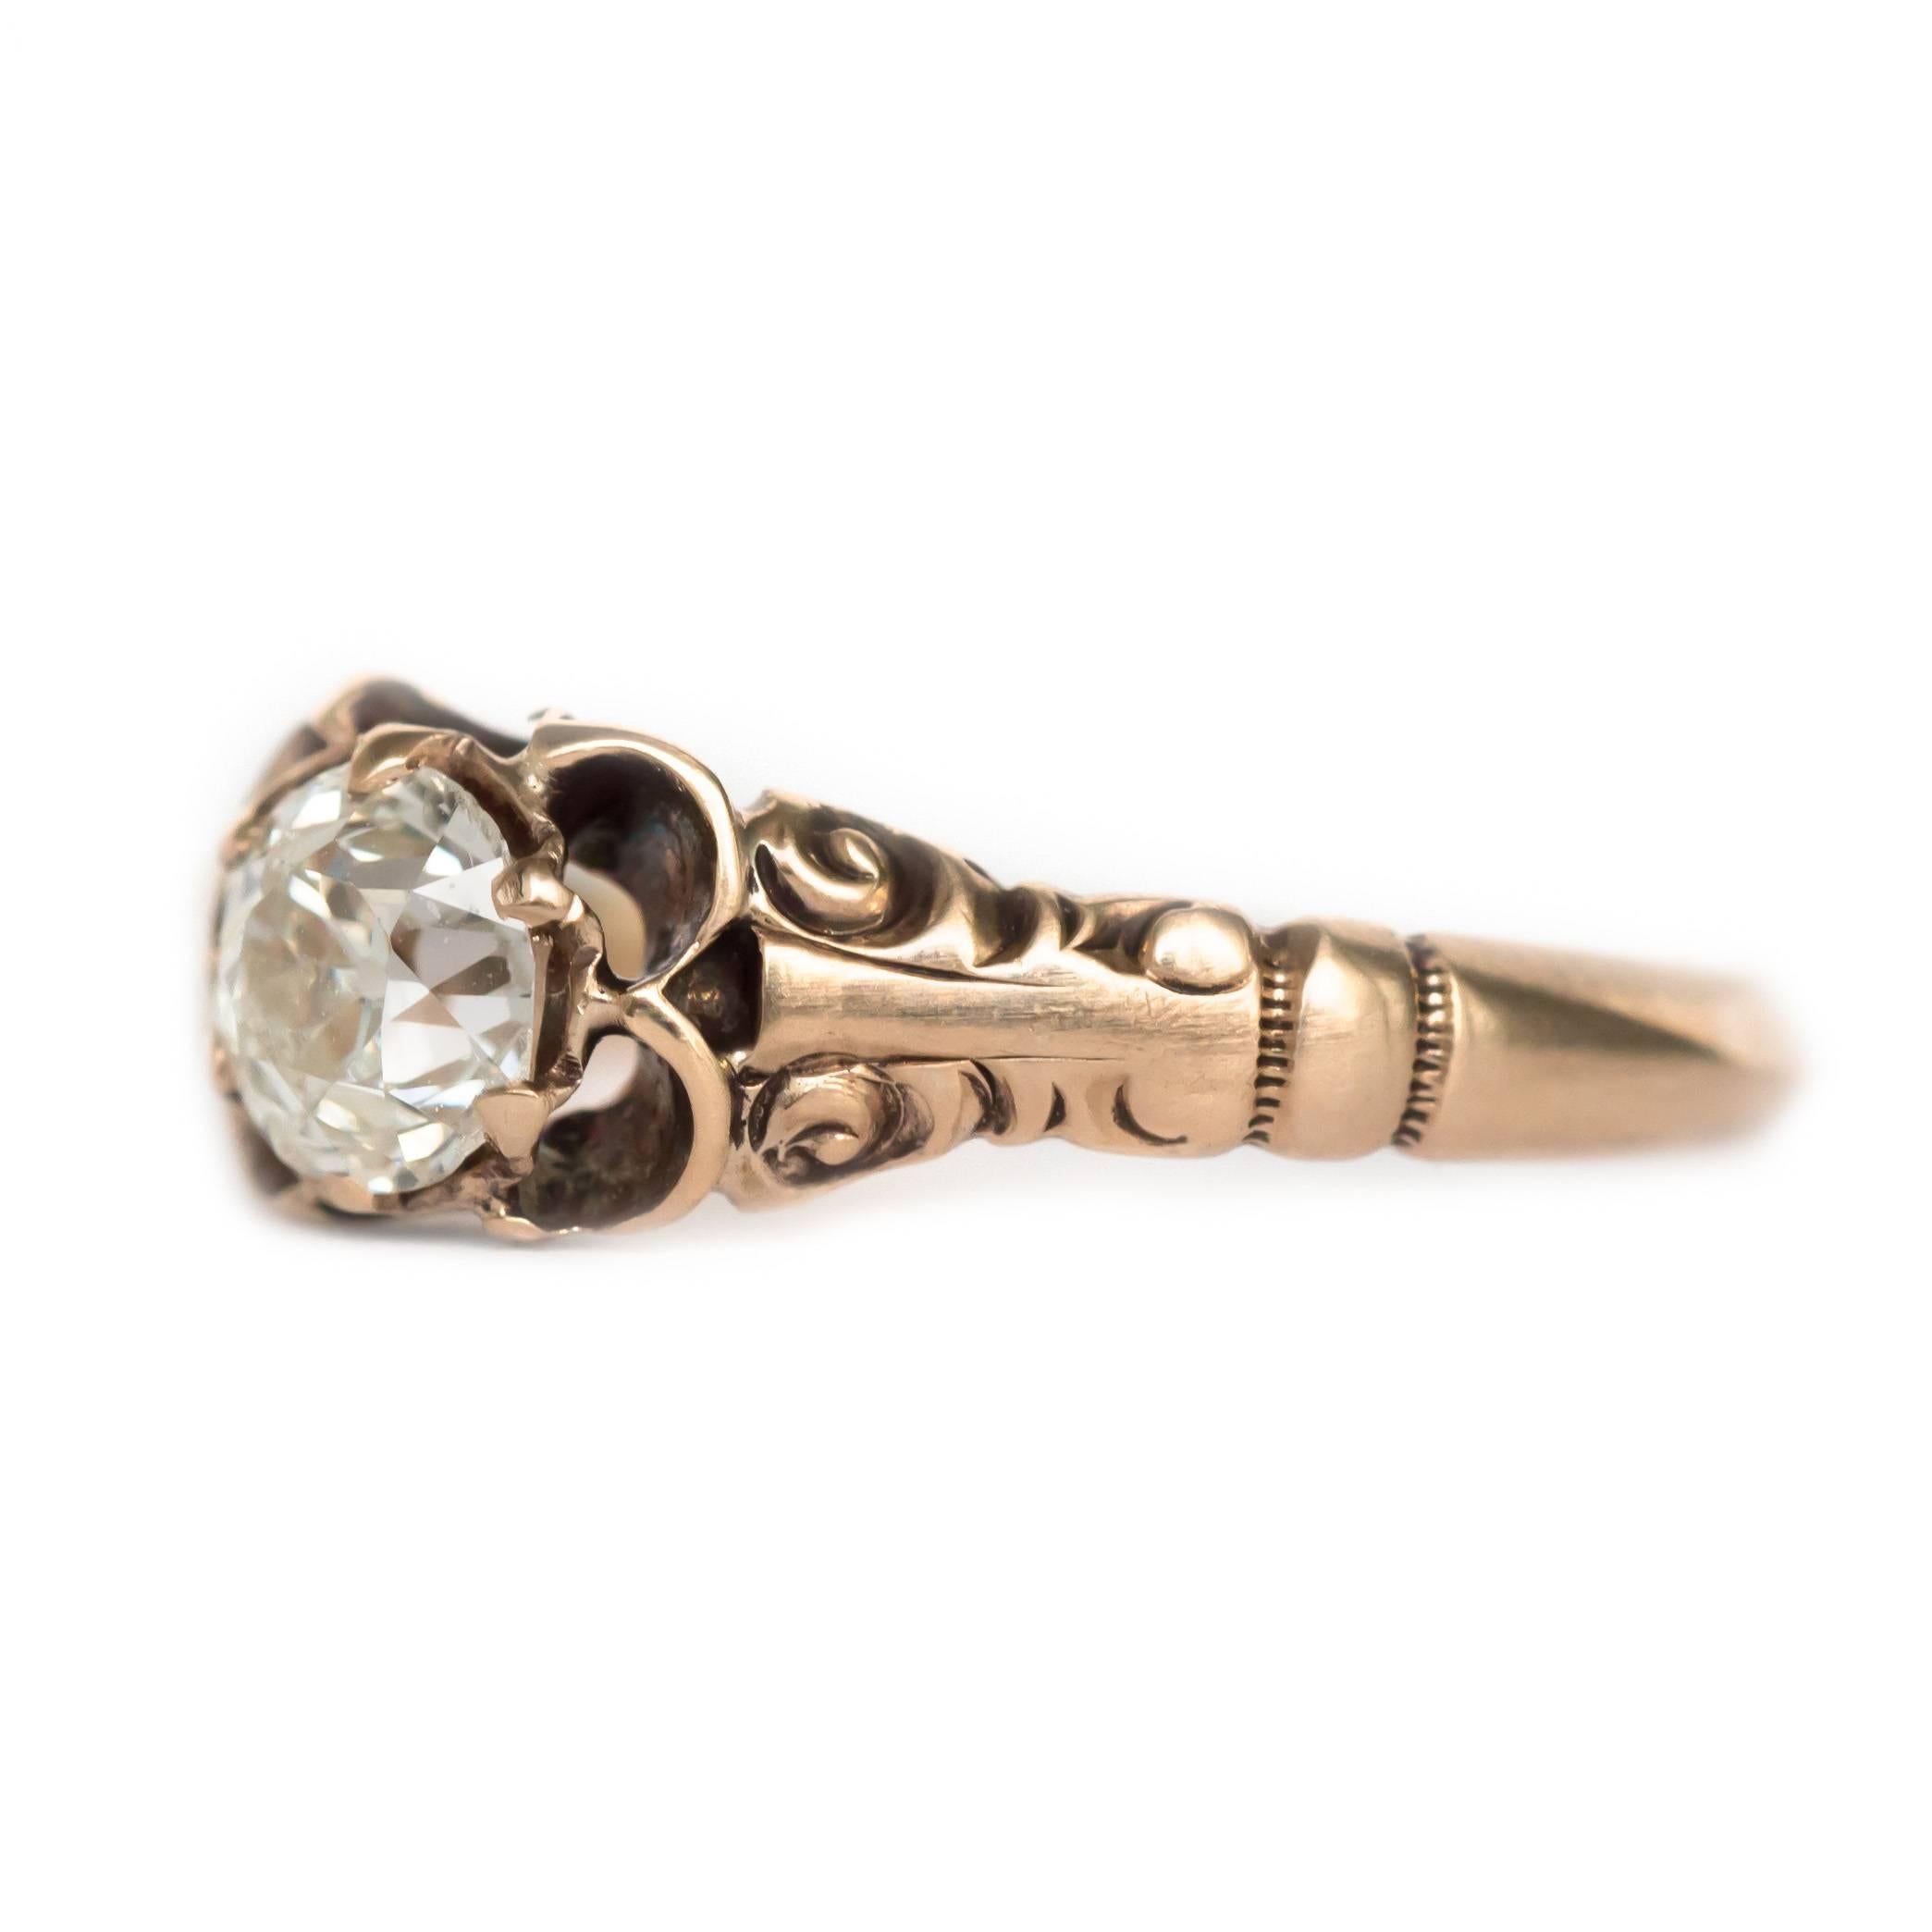 Item Details: 
Ring Size: Approximately 5.65   
Metal Type: Rose Gold 
Weight: 1.7 grams

Center Diamond Details
GIA CERTIFIED Center Diamond - Certificate # [ 2183713788 ]
Shape: Old European 
Carat Weight: .49 carat
Color: J
Clarity: SI2

Finger